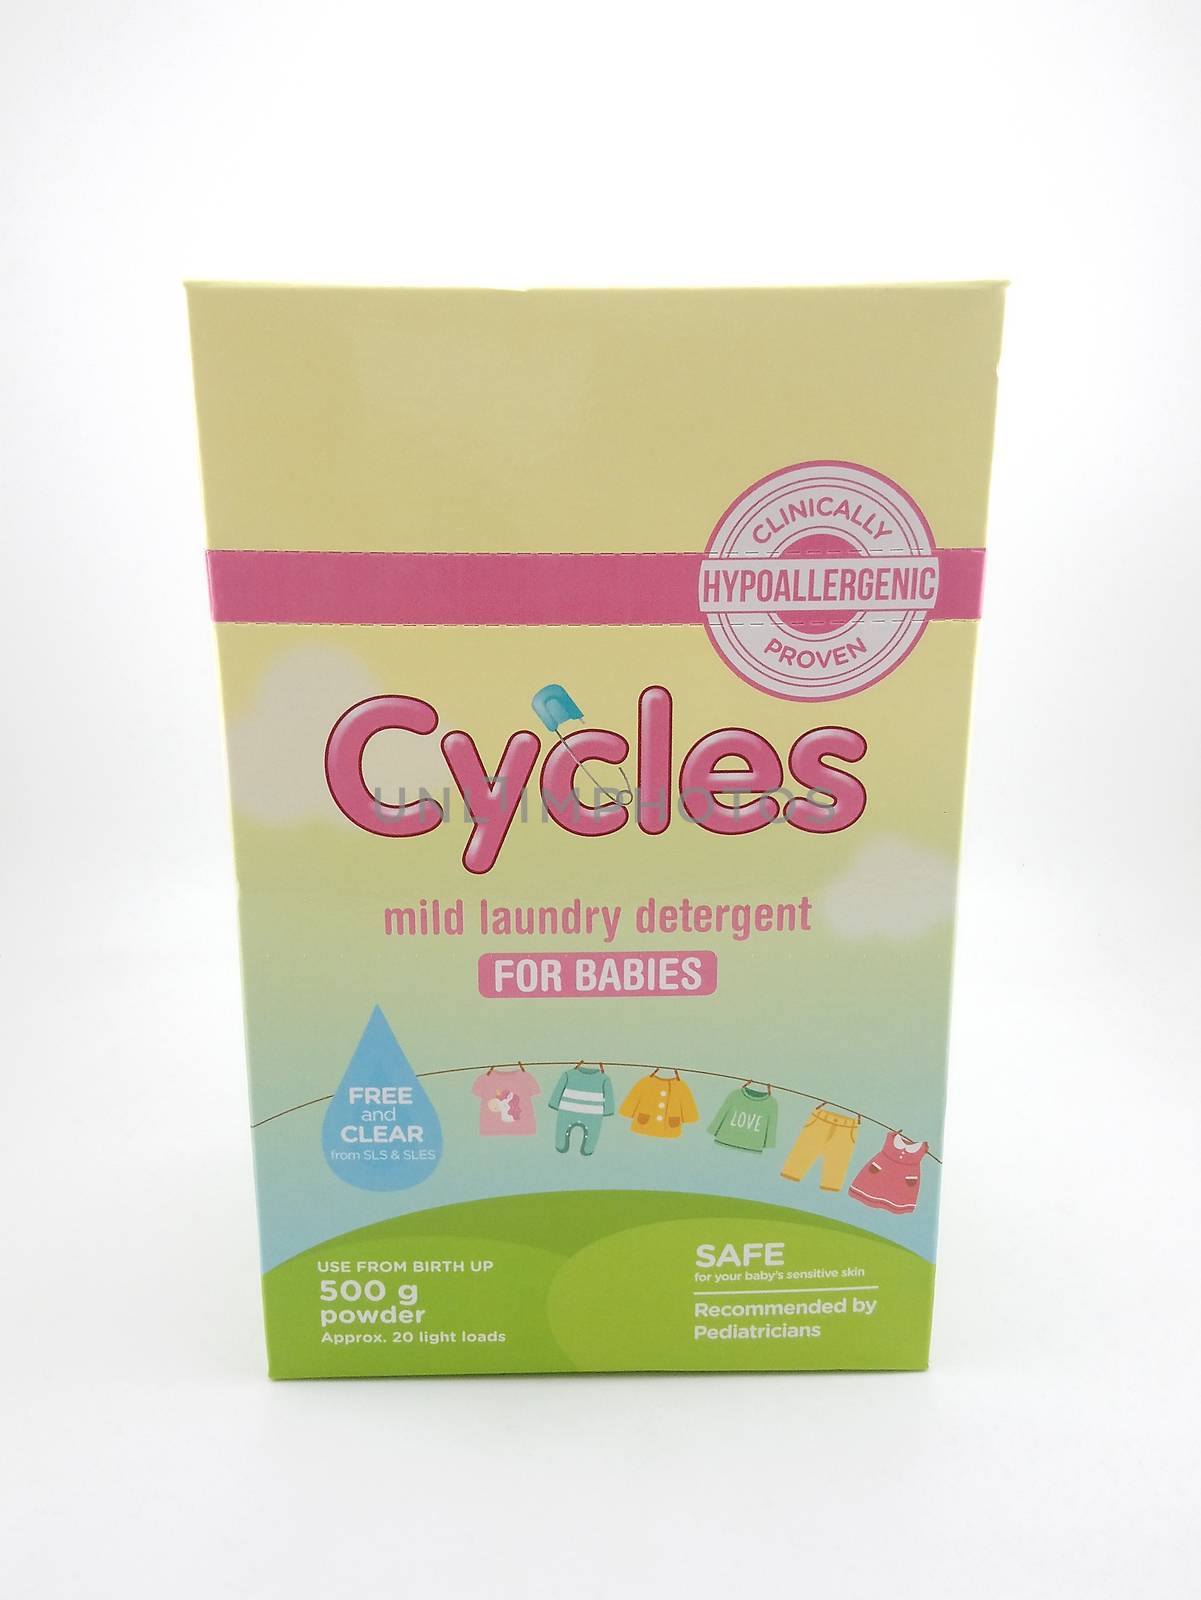 Cycles mild laundry detergent powder for babies in Manila, Phili by imwaltersy